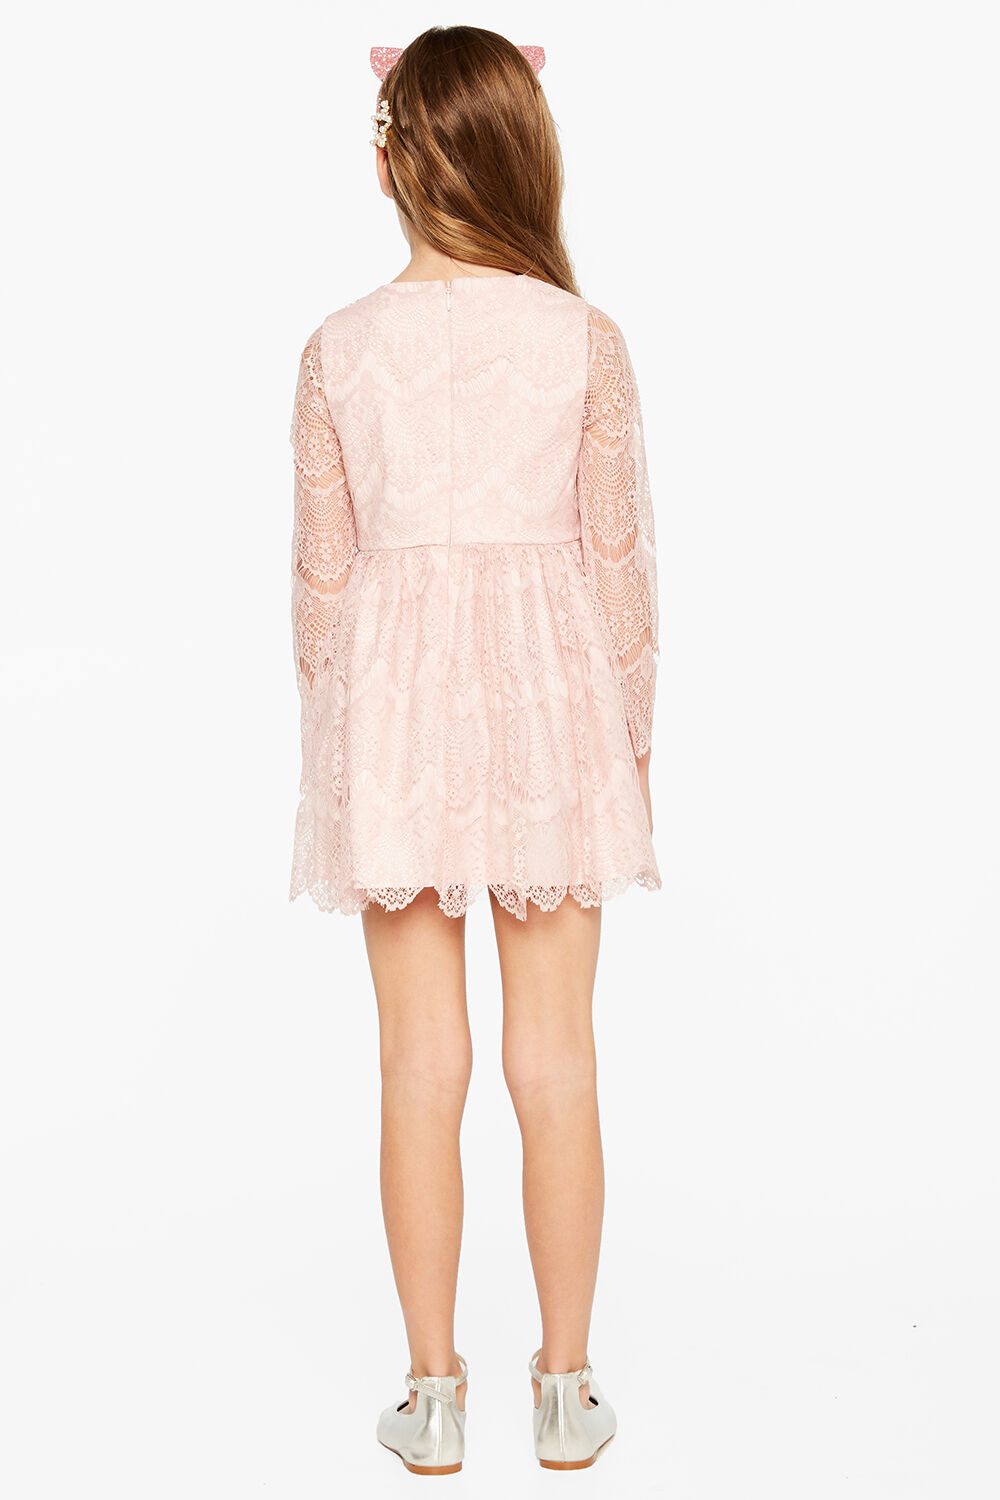 JUNIOR GIRL GERTRUDE LACE DRESS in colour TUSCANY